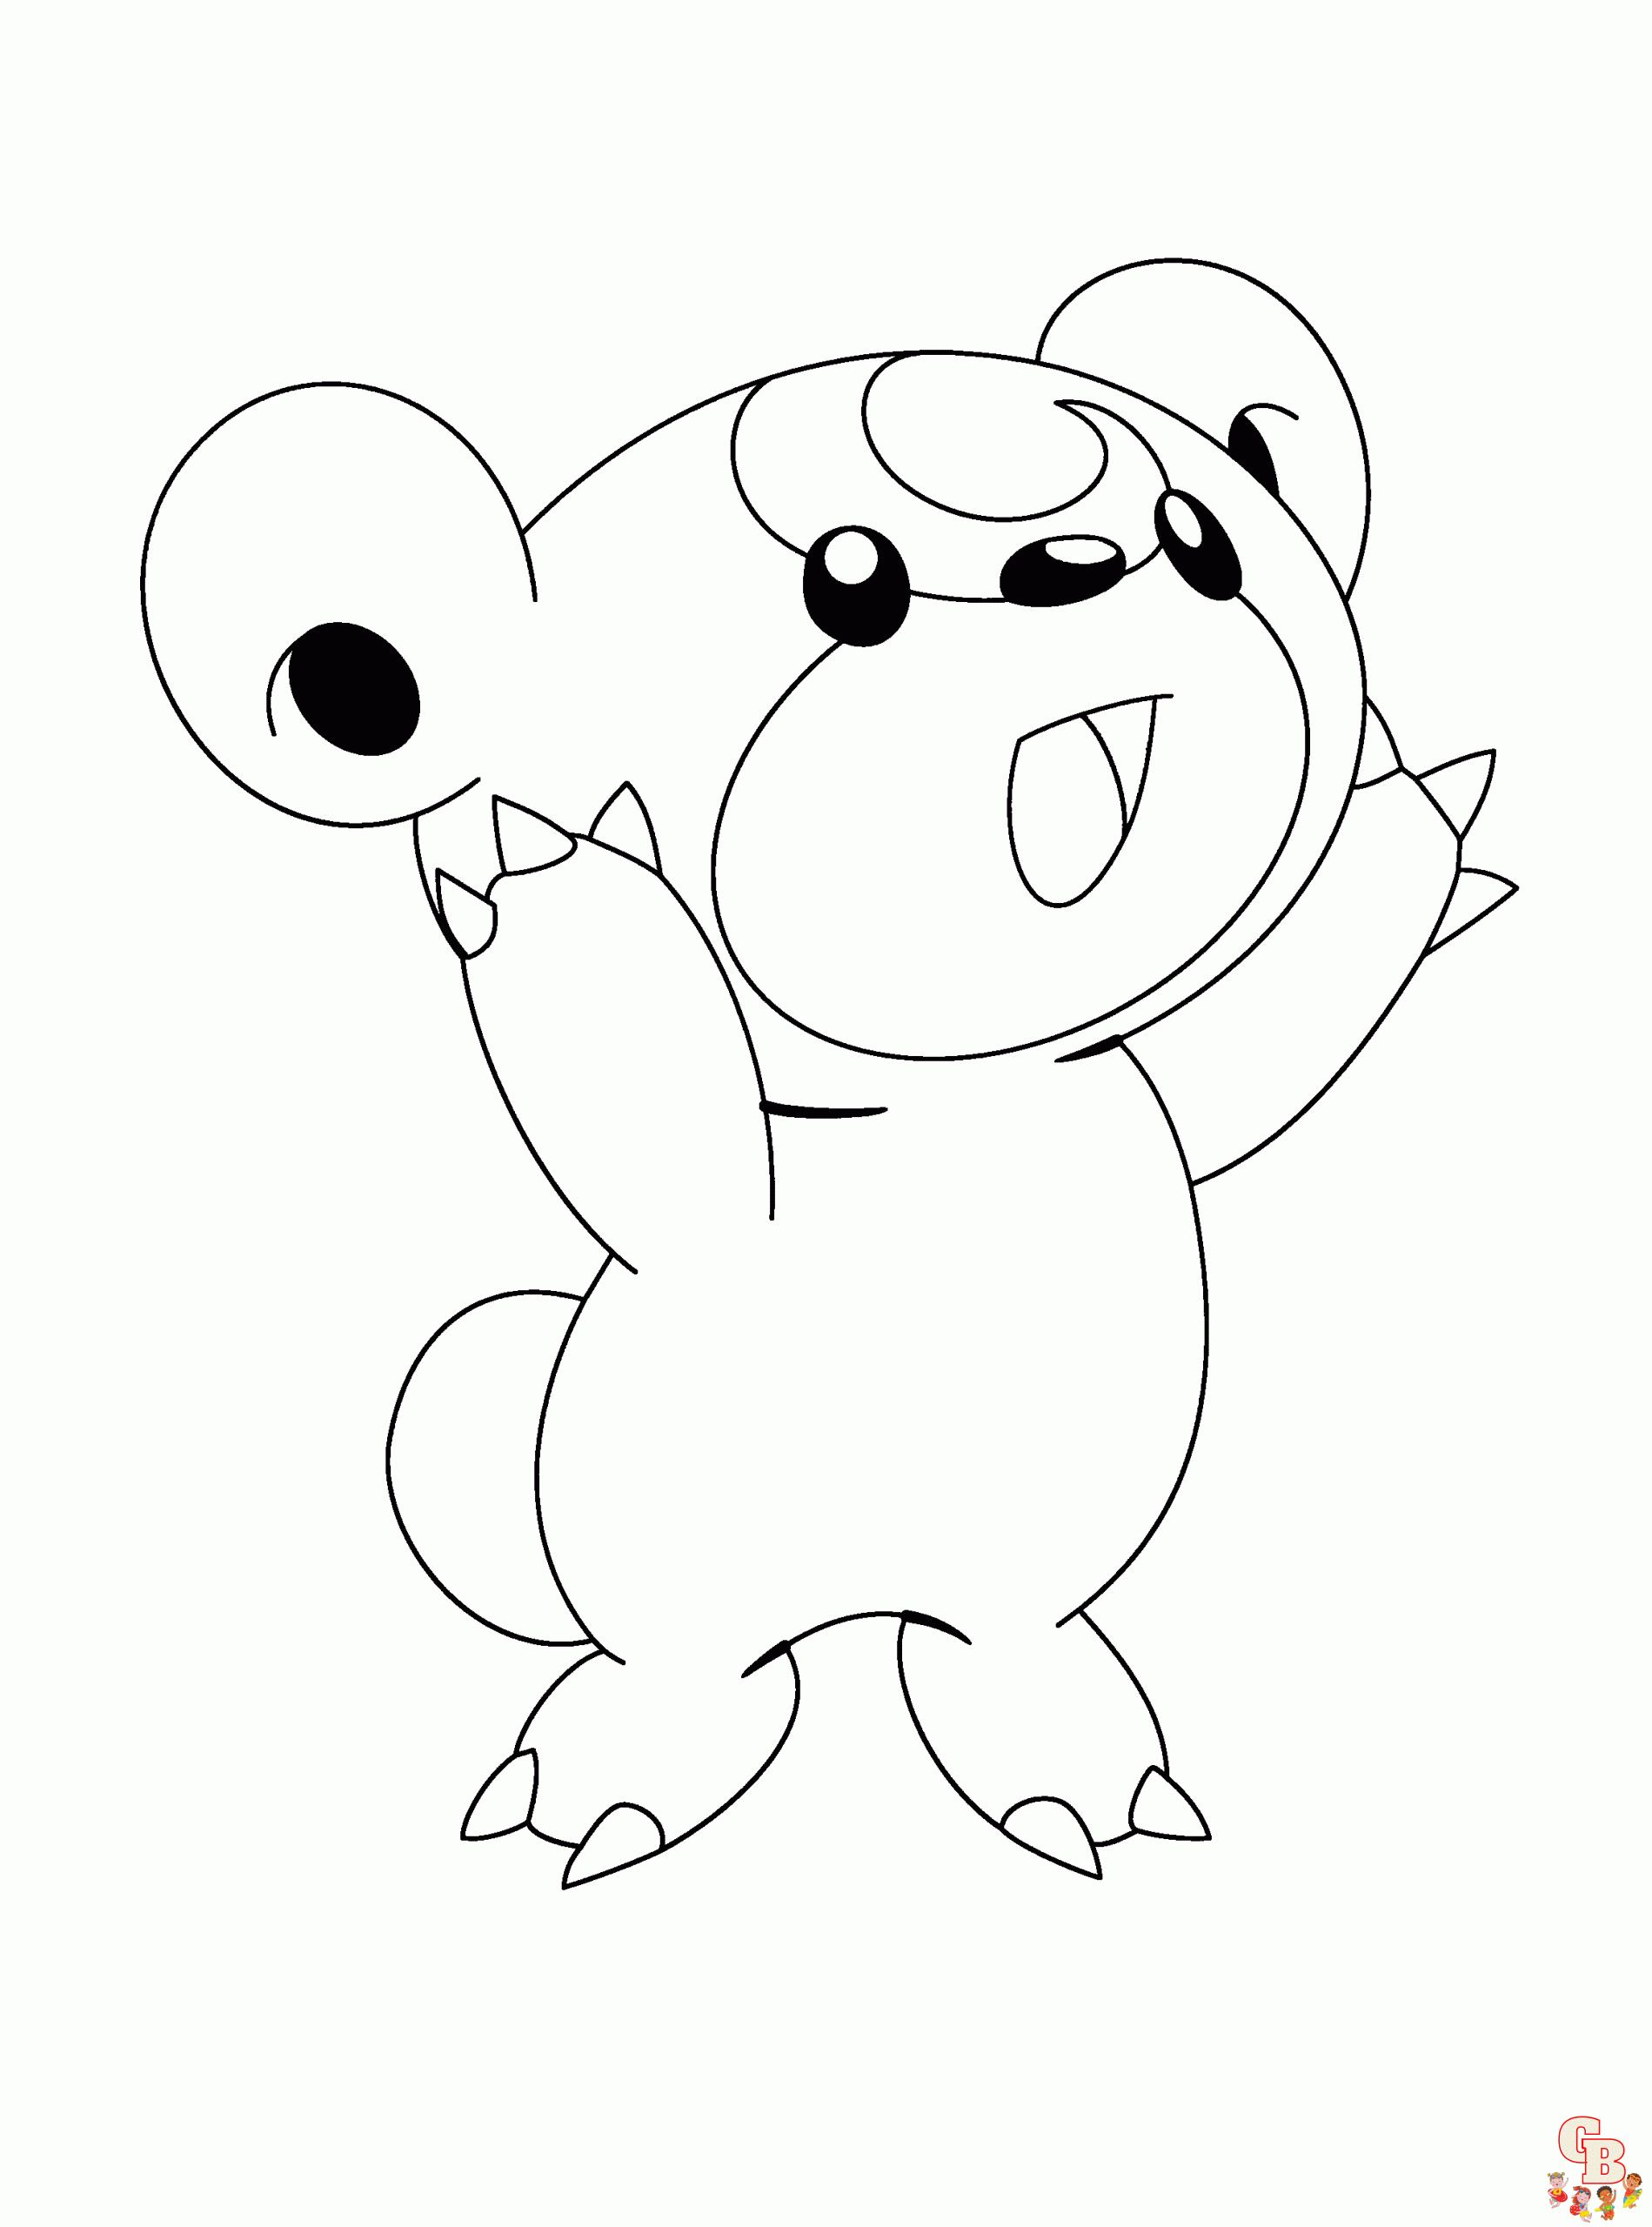 Cute Pokemon coloring pages 10 1